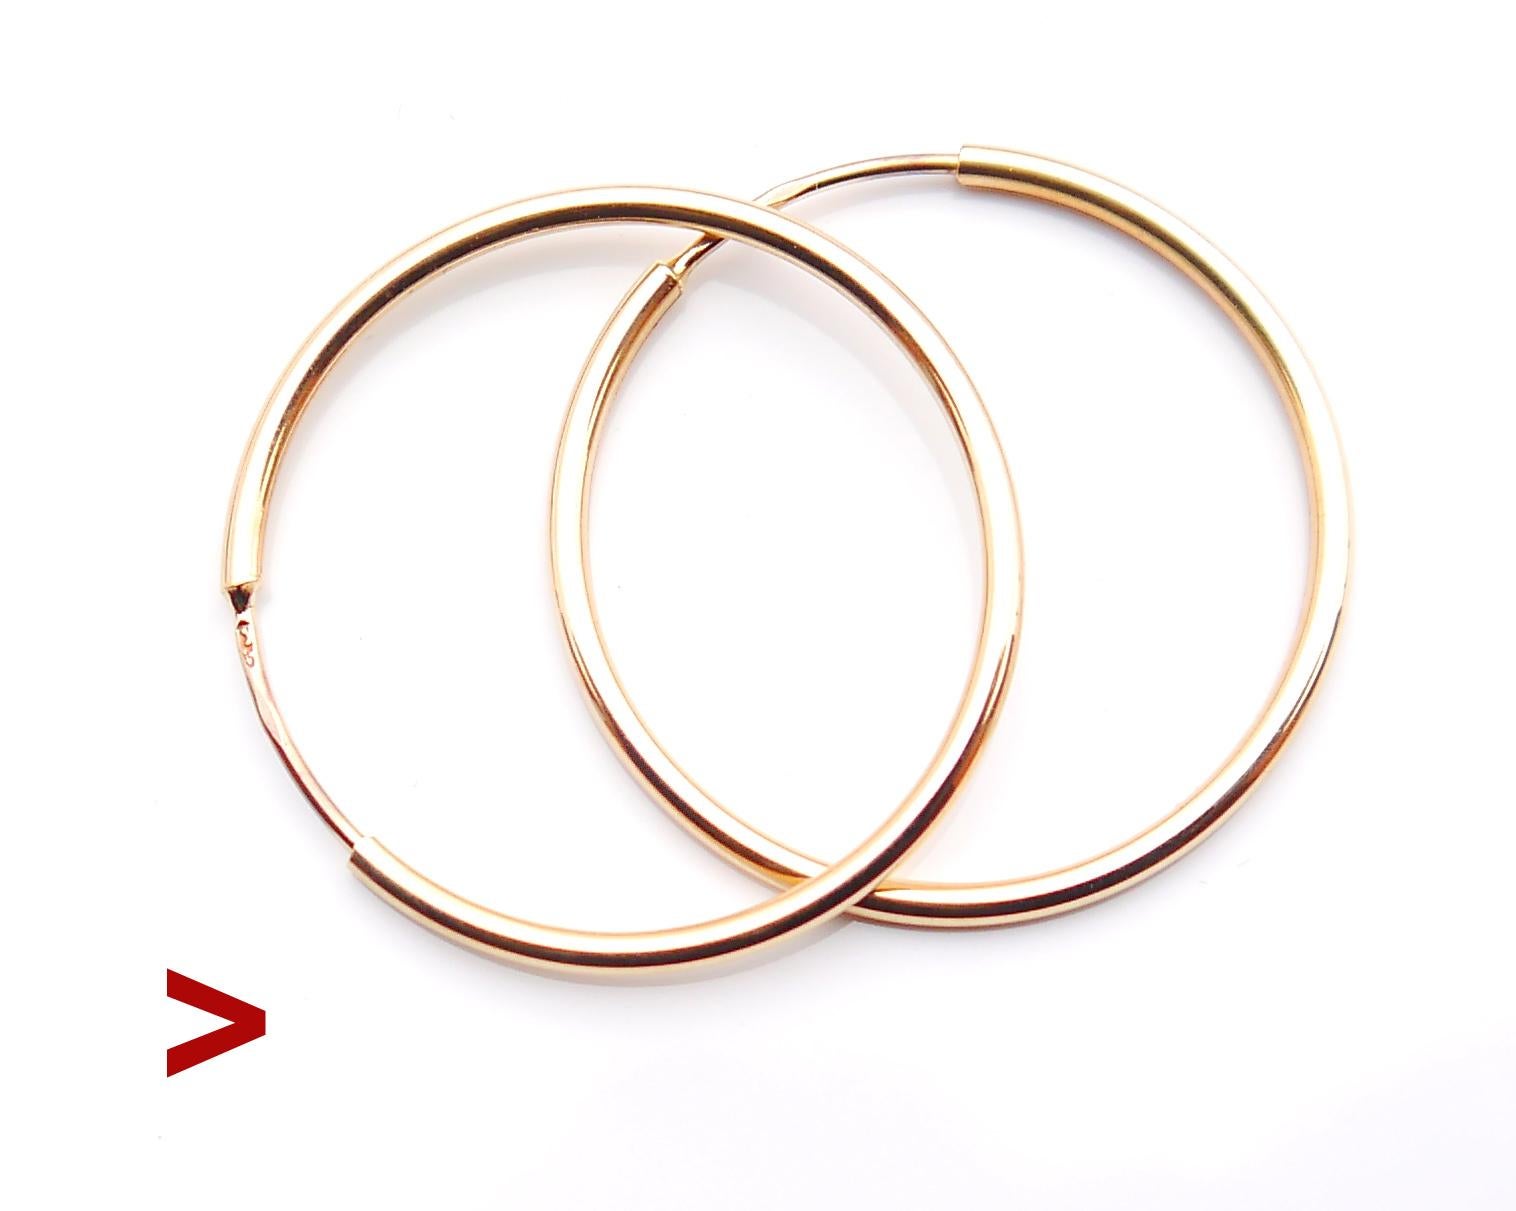 A pair of Creole Hoops in solid 14K Rose Gold was made and purchased in Socialist Poland in the 1970s. Note that this model does not suggest any internal springs or folding parts. Ends just pull out of the tubes to open and ends get back when